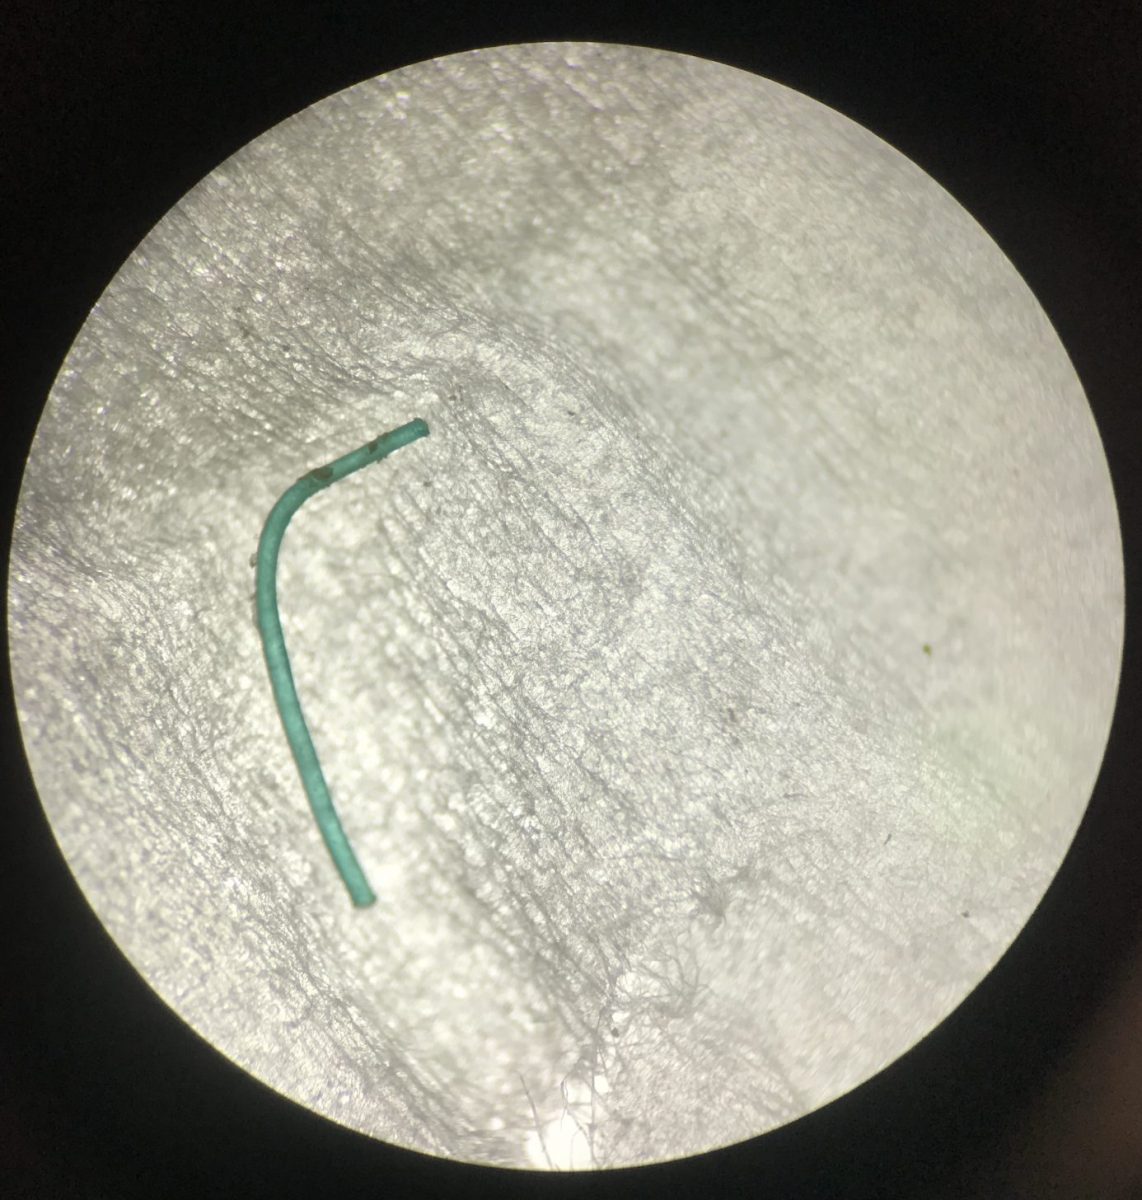 Microscopic image of a fishing line found in the gastrointestinal tract of a Bahamian fish.